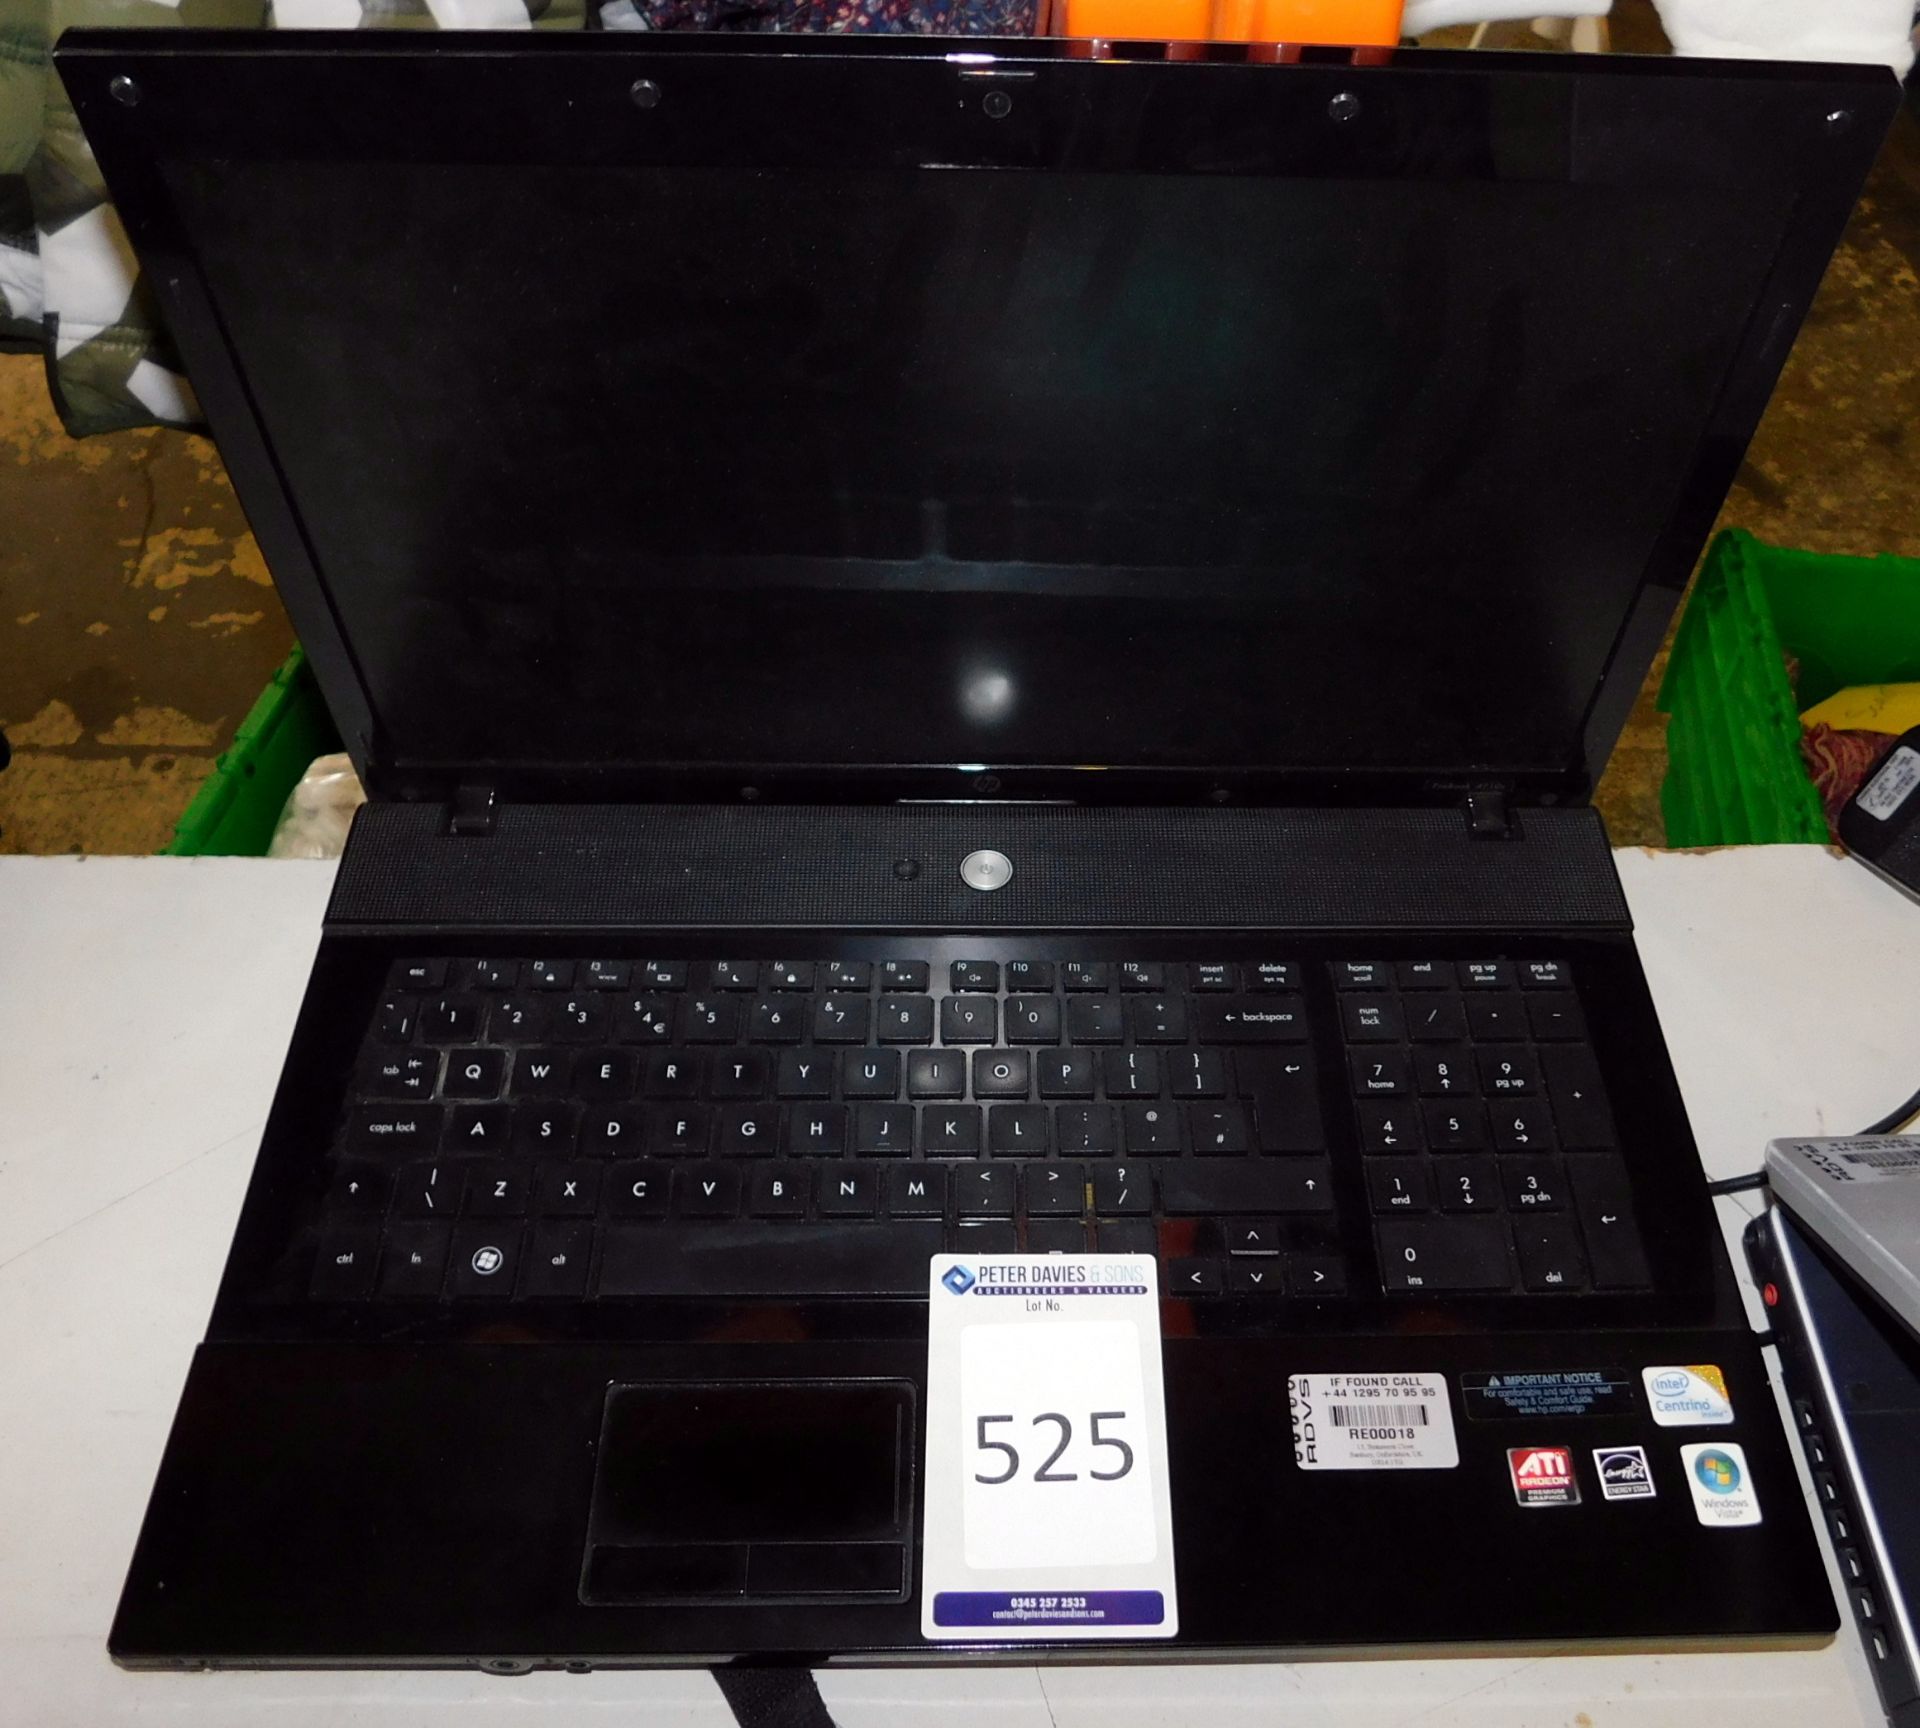 HP Probook 4710s Core 2 Duo 2.10ghz Laptop with 2gb RAM (Located Stockport – Viewing by